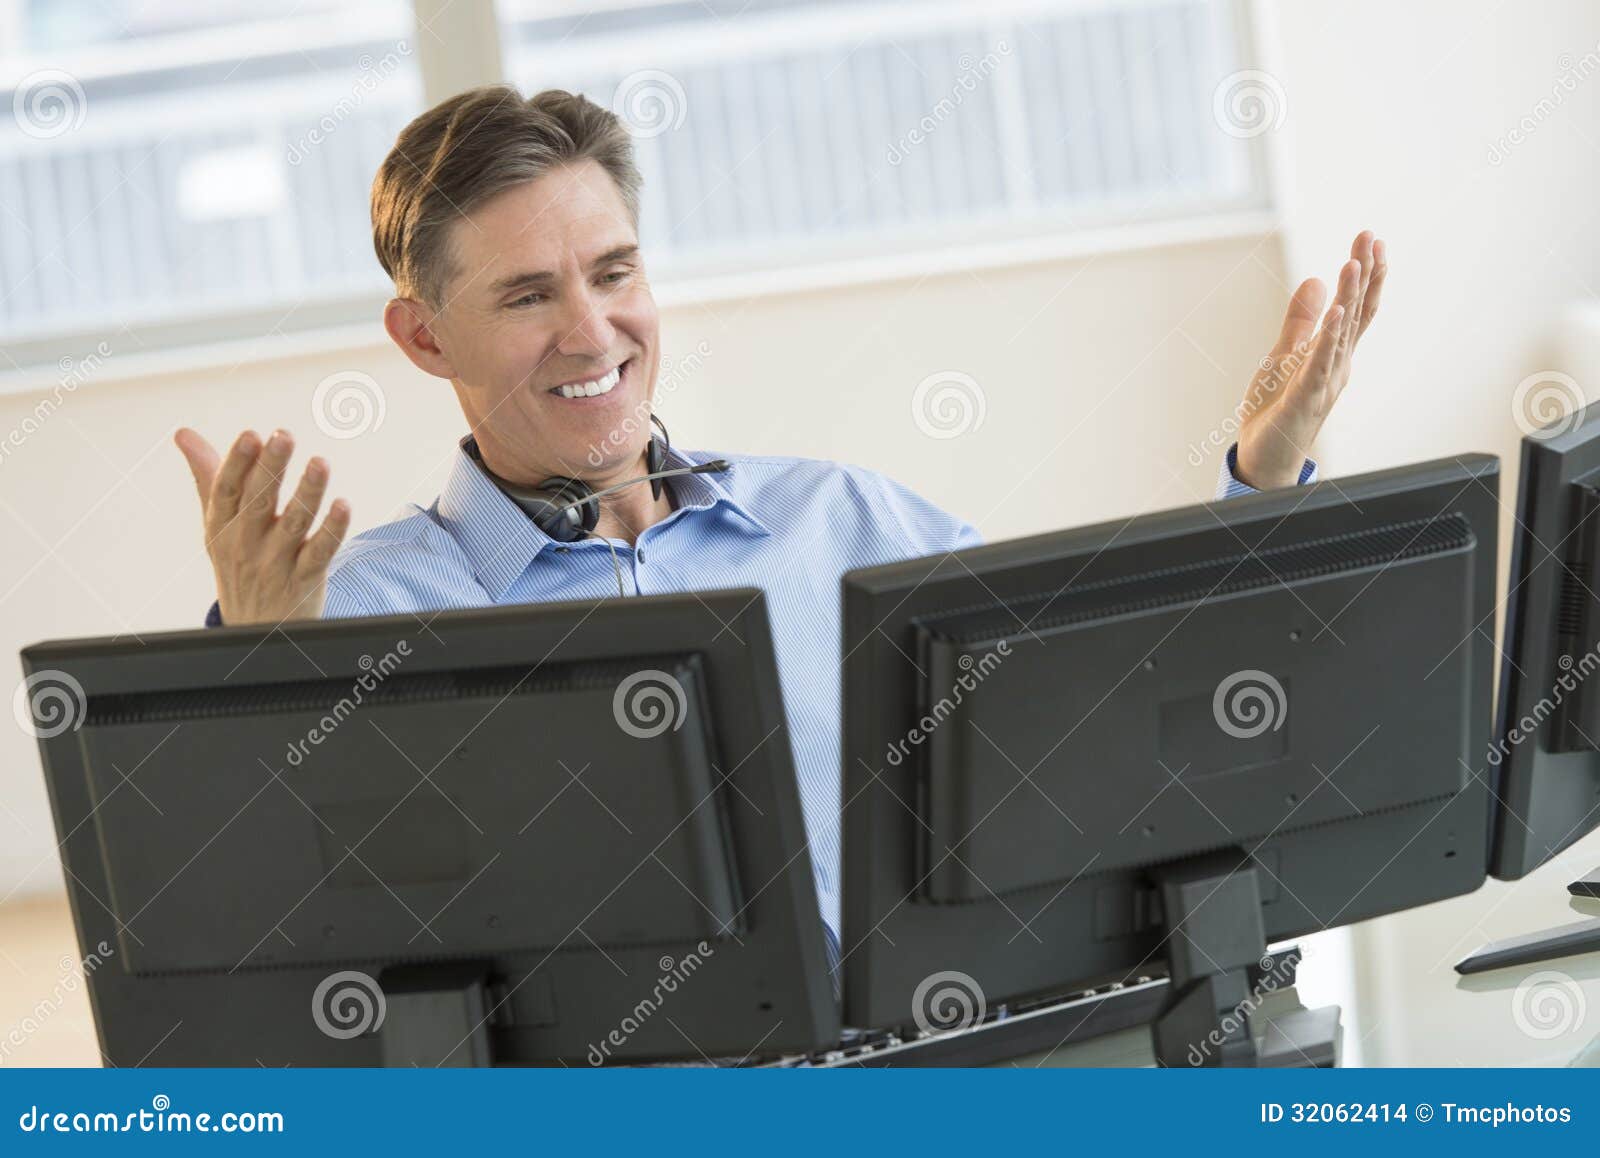 happy trader gesturing while using multiple screens at desk